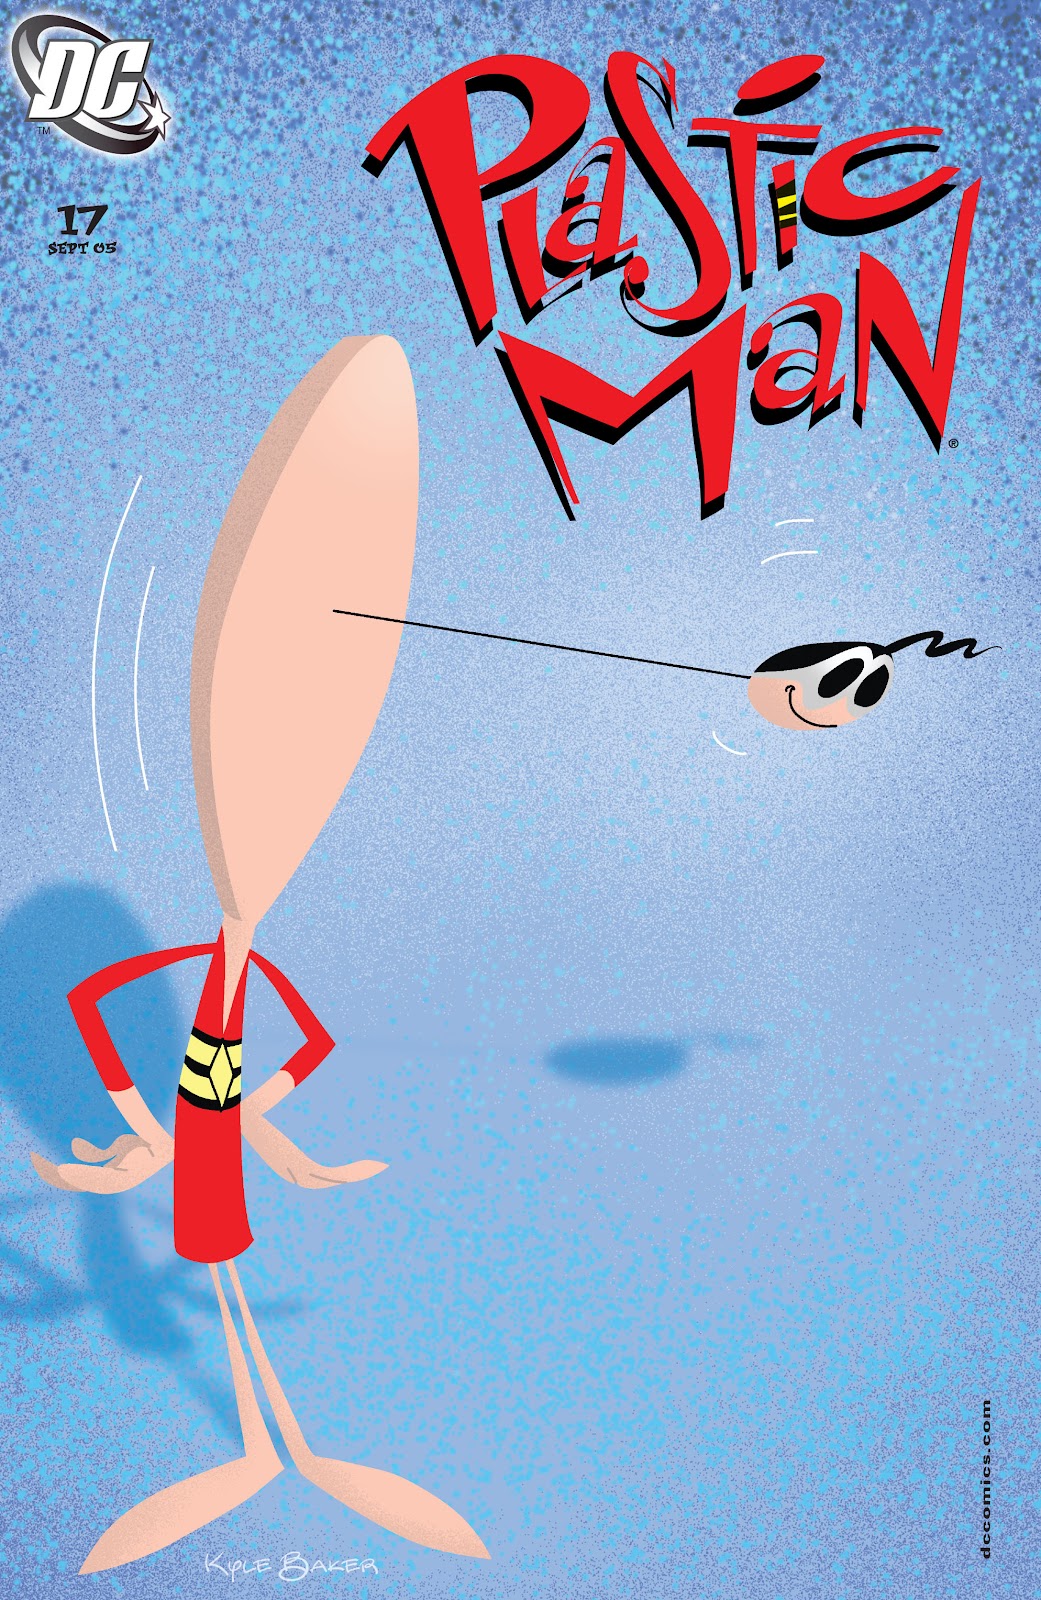 Plastic Man (2004) issue 17 - Page 1